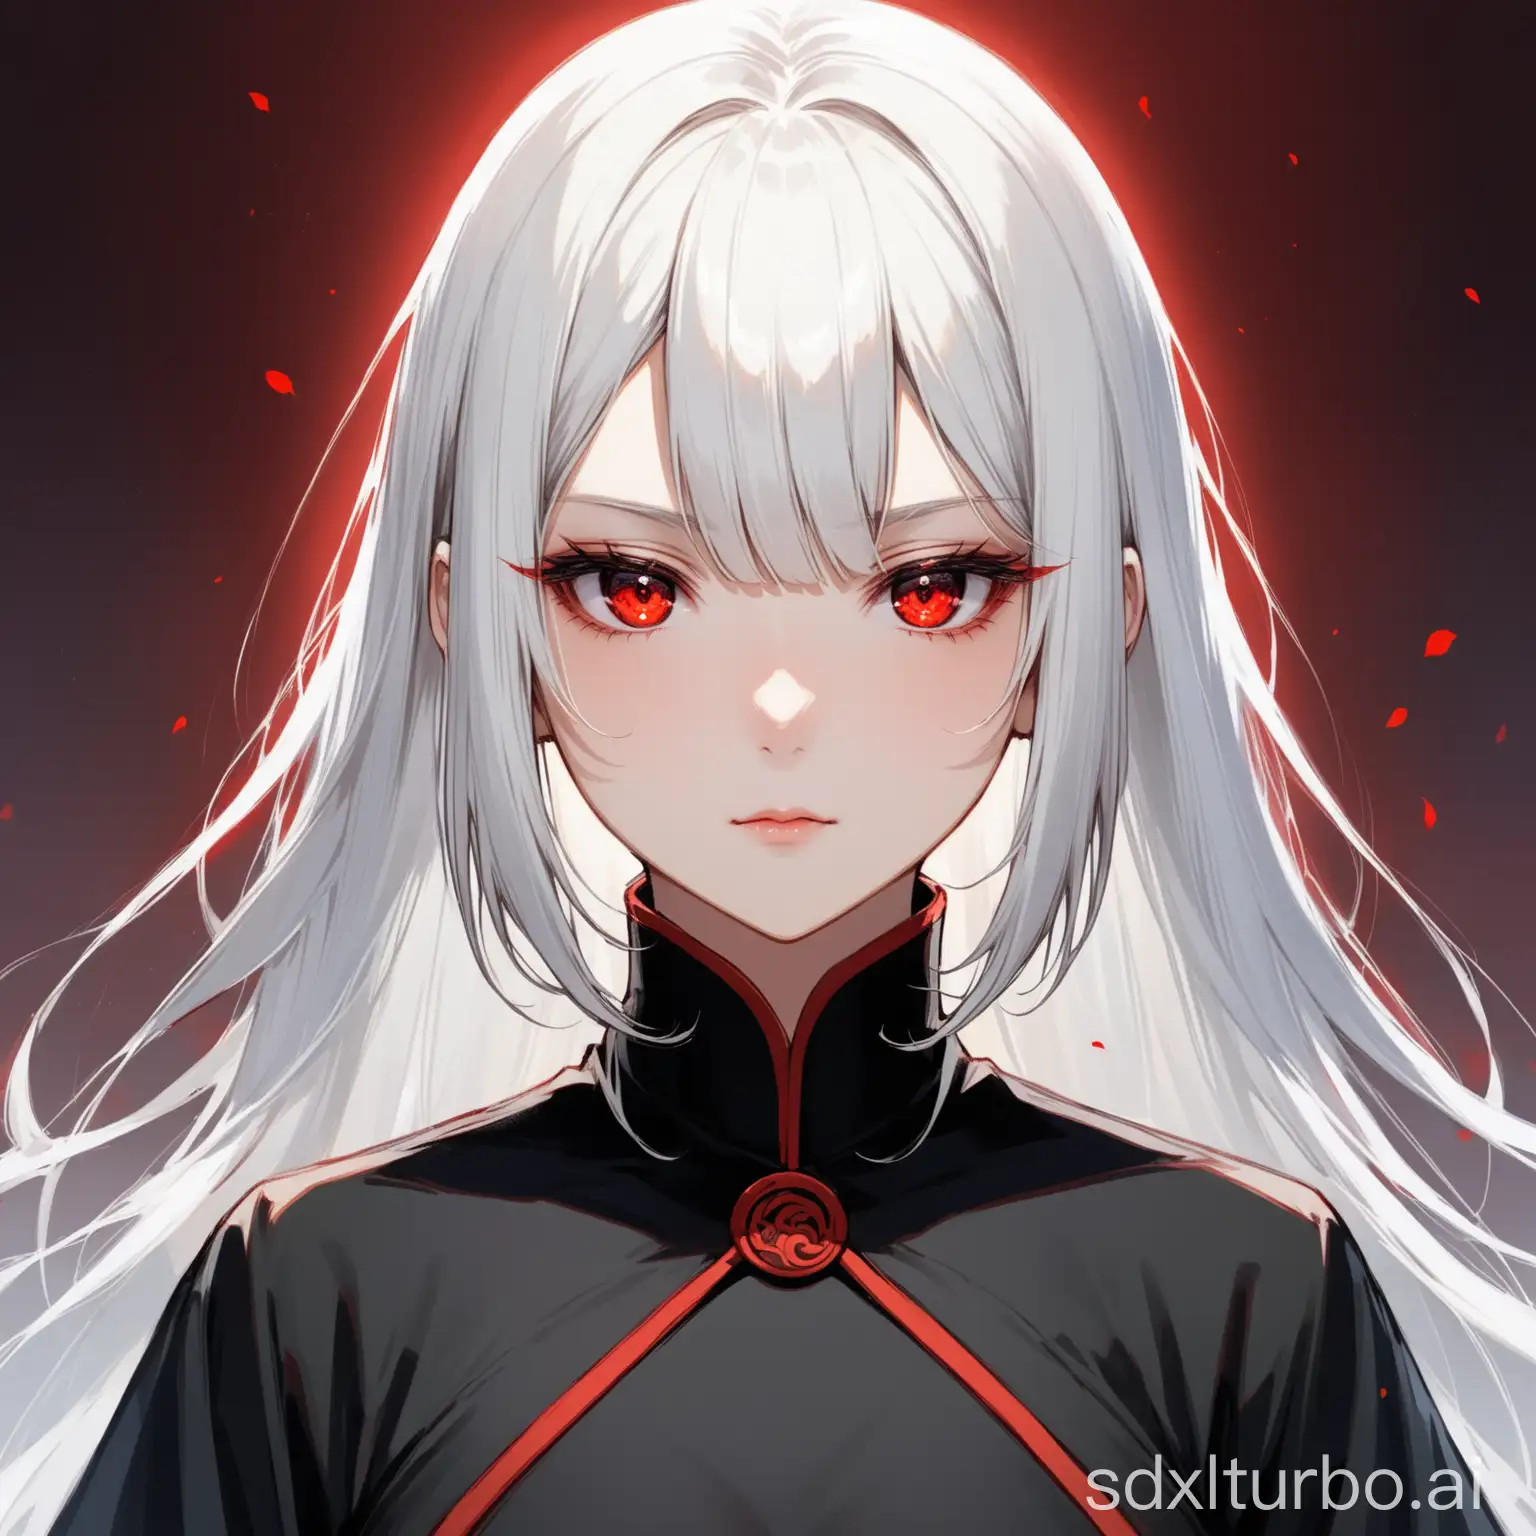 A mesmerizing white-haired red-eyed woman, with bangs styled in a Qi Liuhai haircut, dressed in black, somewhat distant, eyes slightly narrowed, gaze somewhat sharp and aloof.